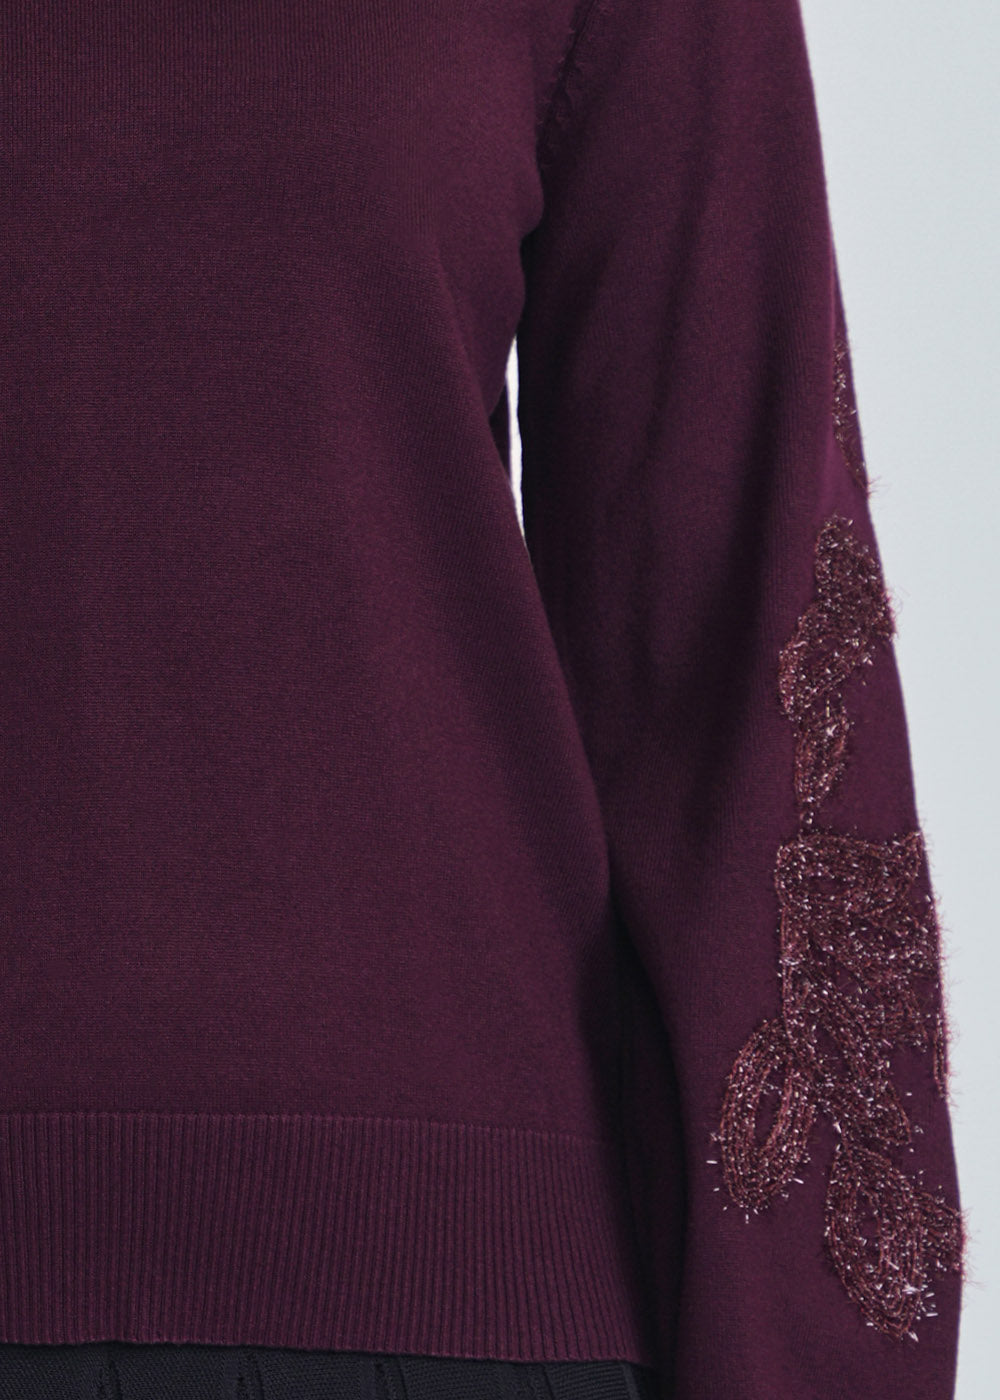 Burgundy Knit Sweater With Detailed Sleeve